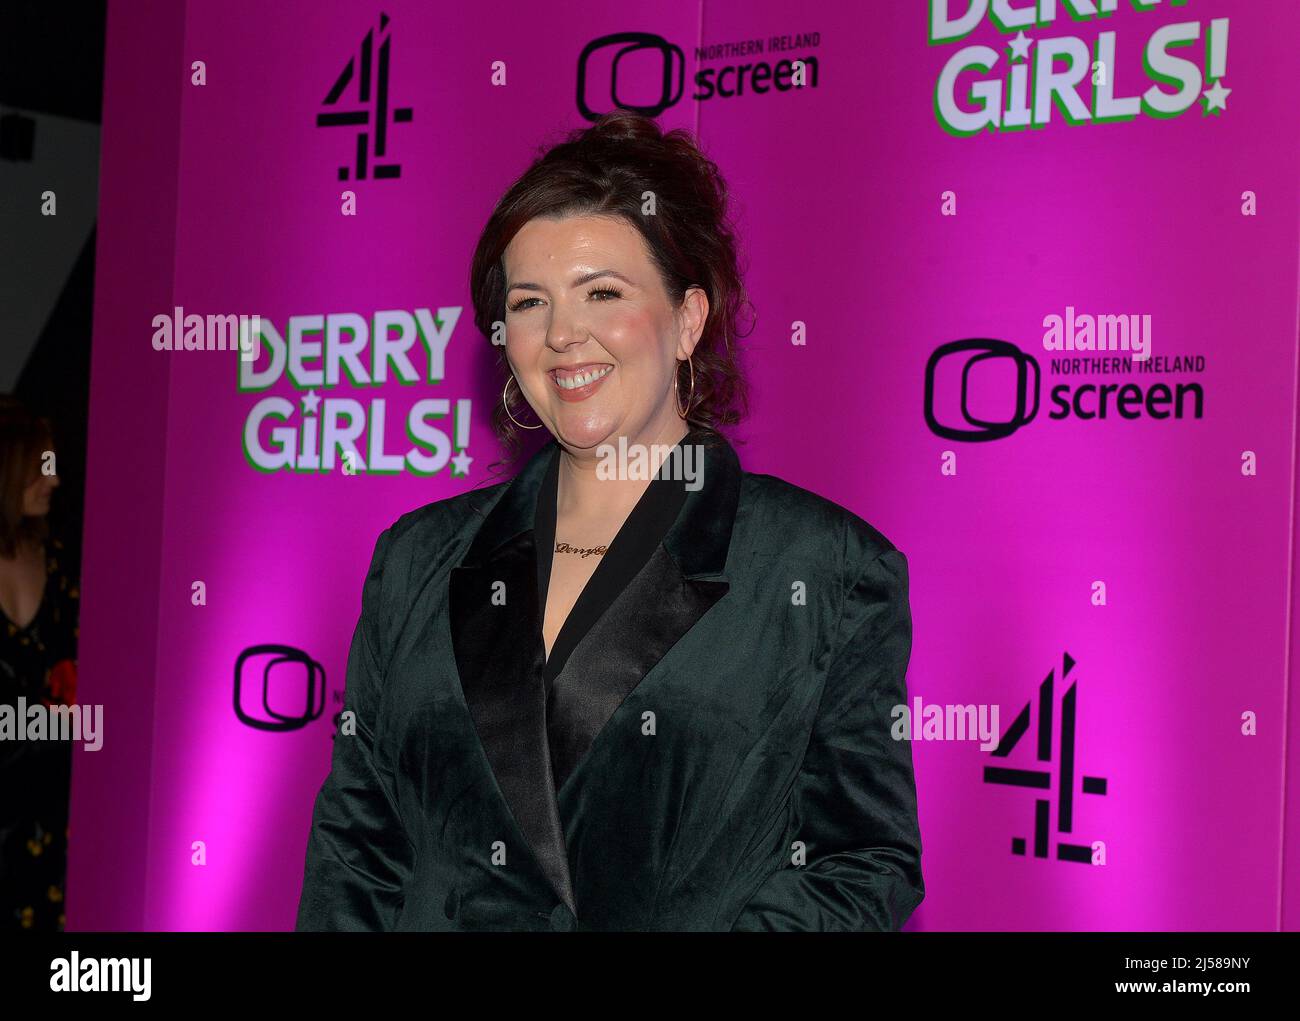 Creator and writer Lisa McGee attends the premiere of Derry Girls Season 3 in Derry, Londonderry, Northern Ireland, 7 April 2022. ©George Sweeney / Alamy Stock Photo Stock Photo